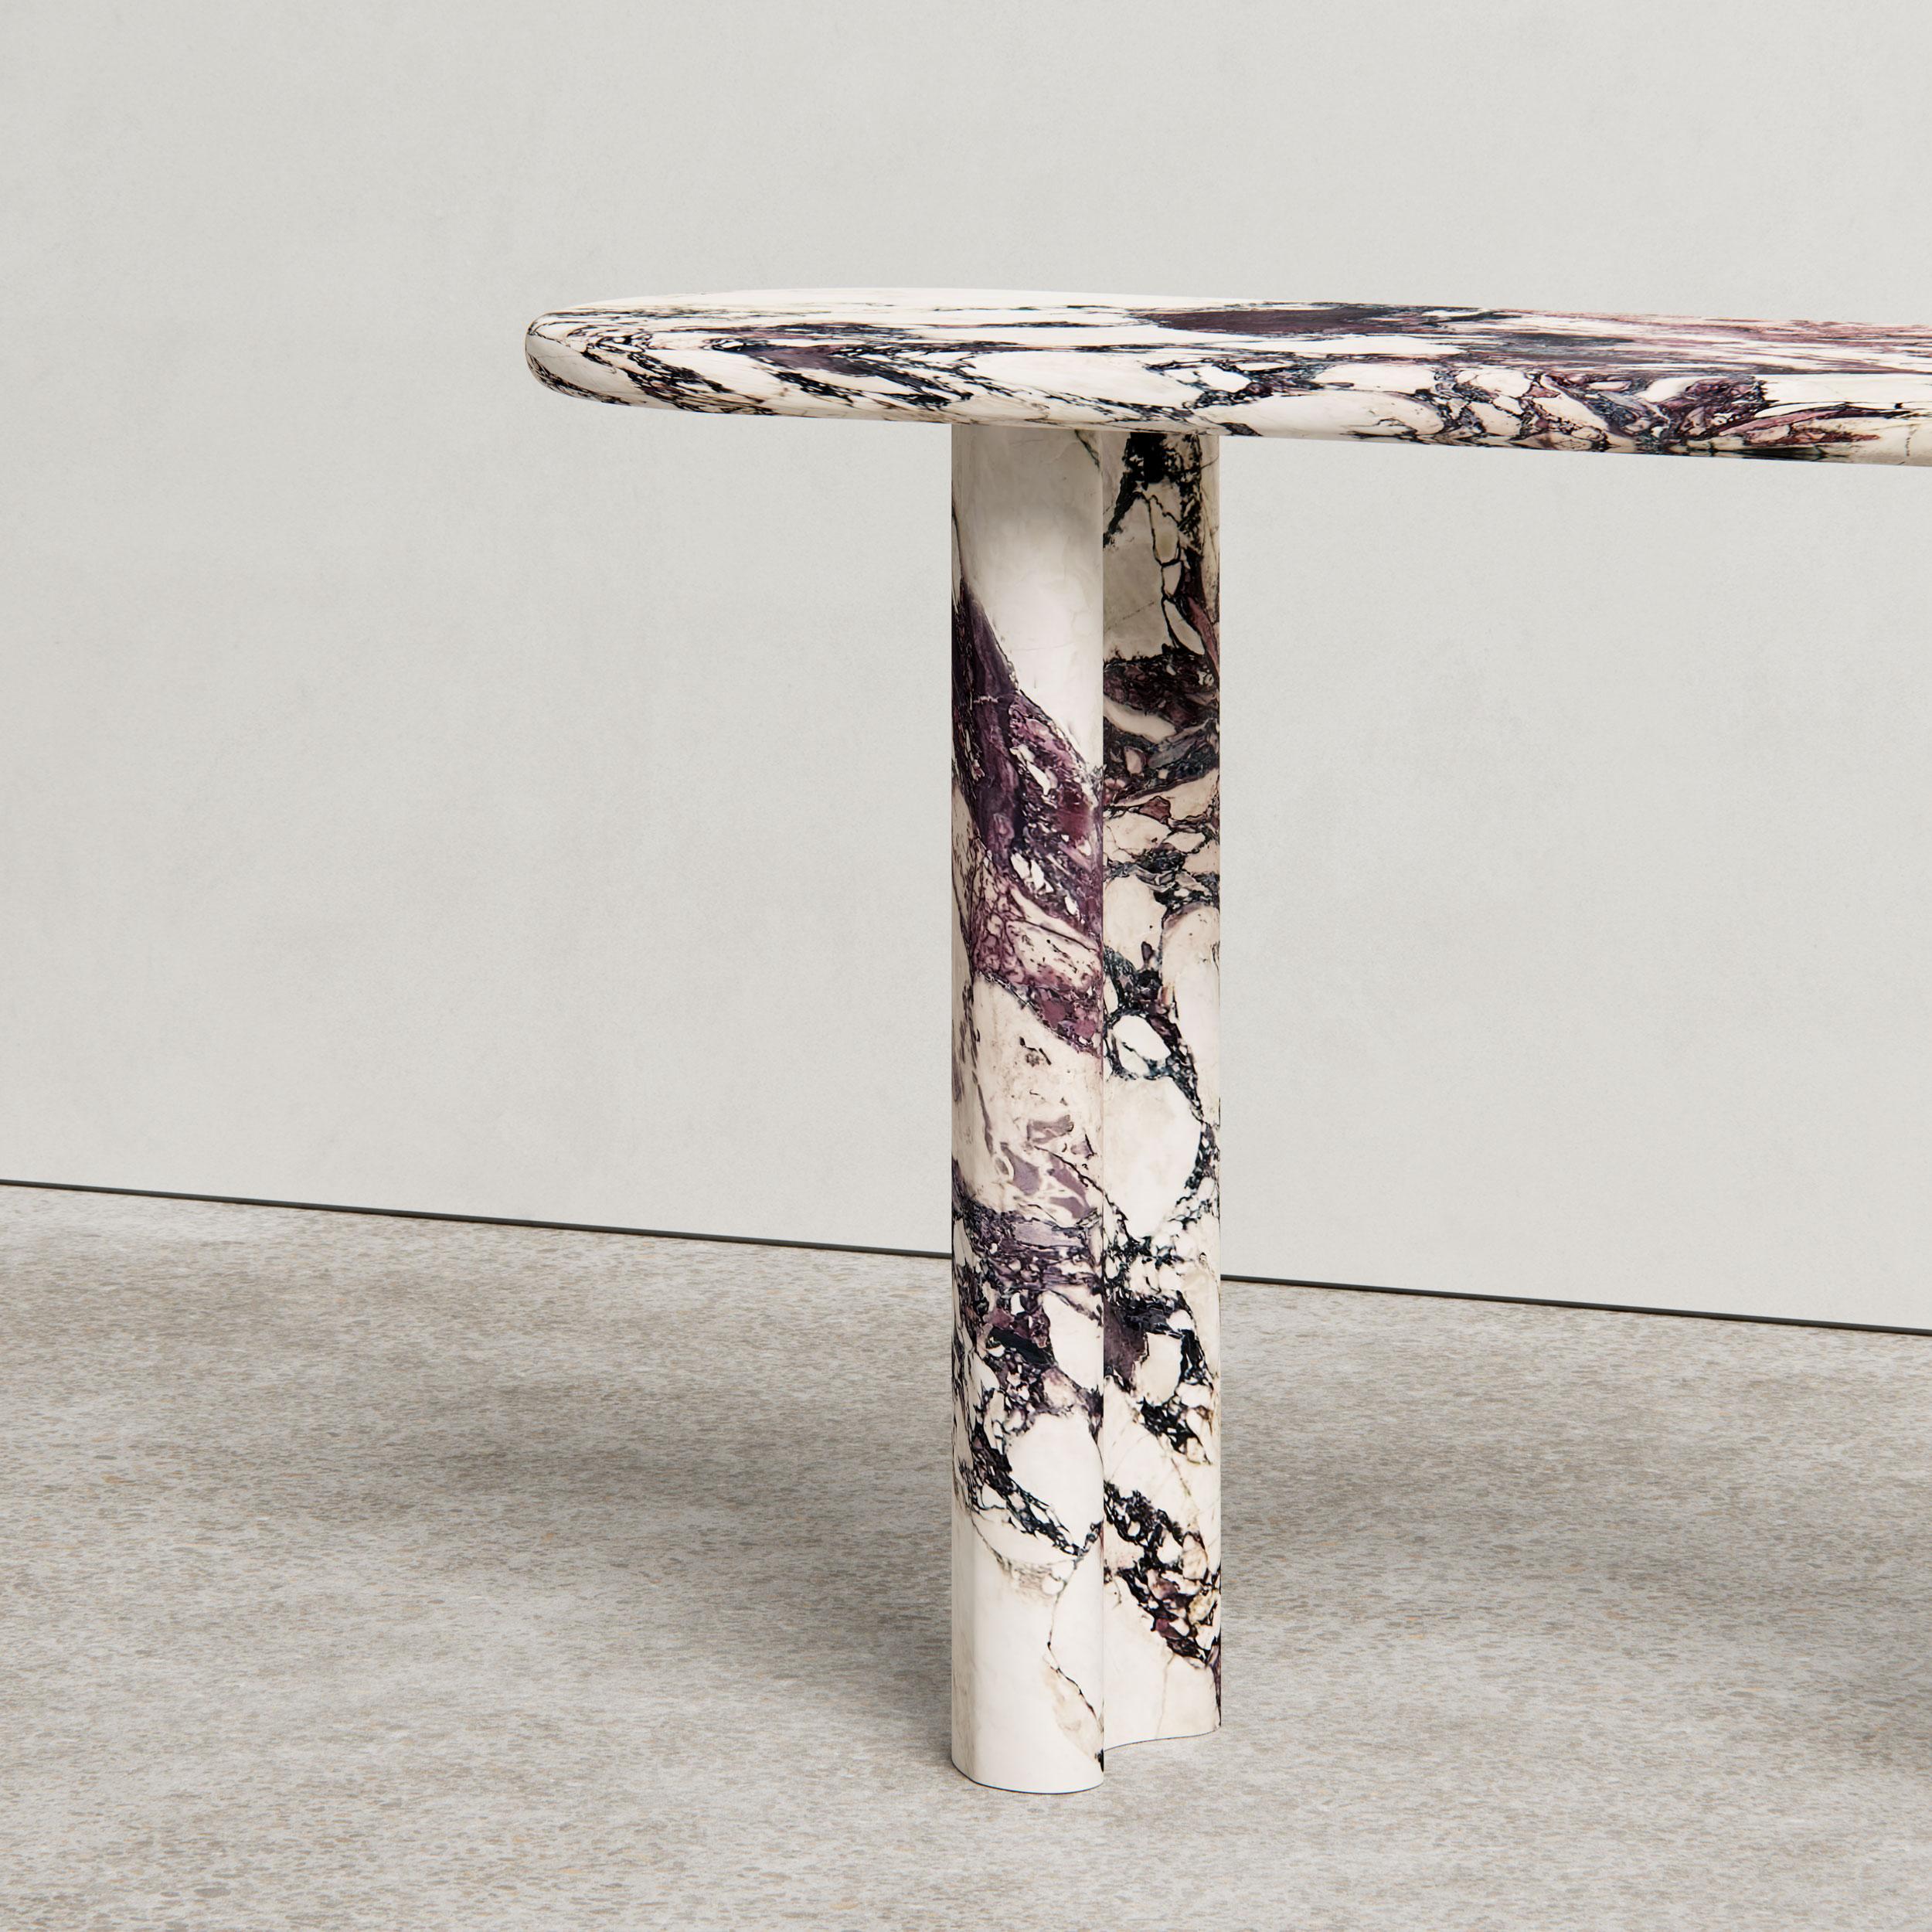 The Pietra Console Designed by Just Adele. This design is carved from a single block of Italian natural stone to create organic curves with a bullnose edge and kidney-shaped legs. 

Available in Viola Monet and Travertine, with bespoke stones